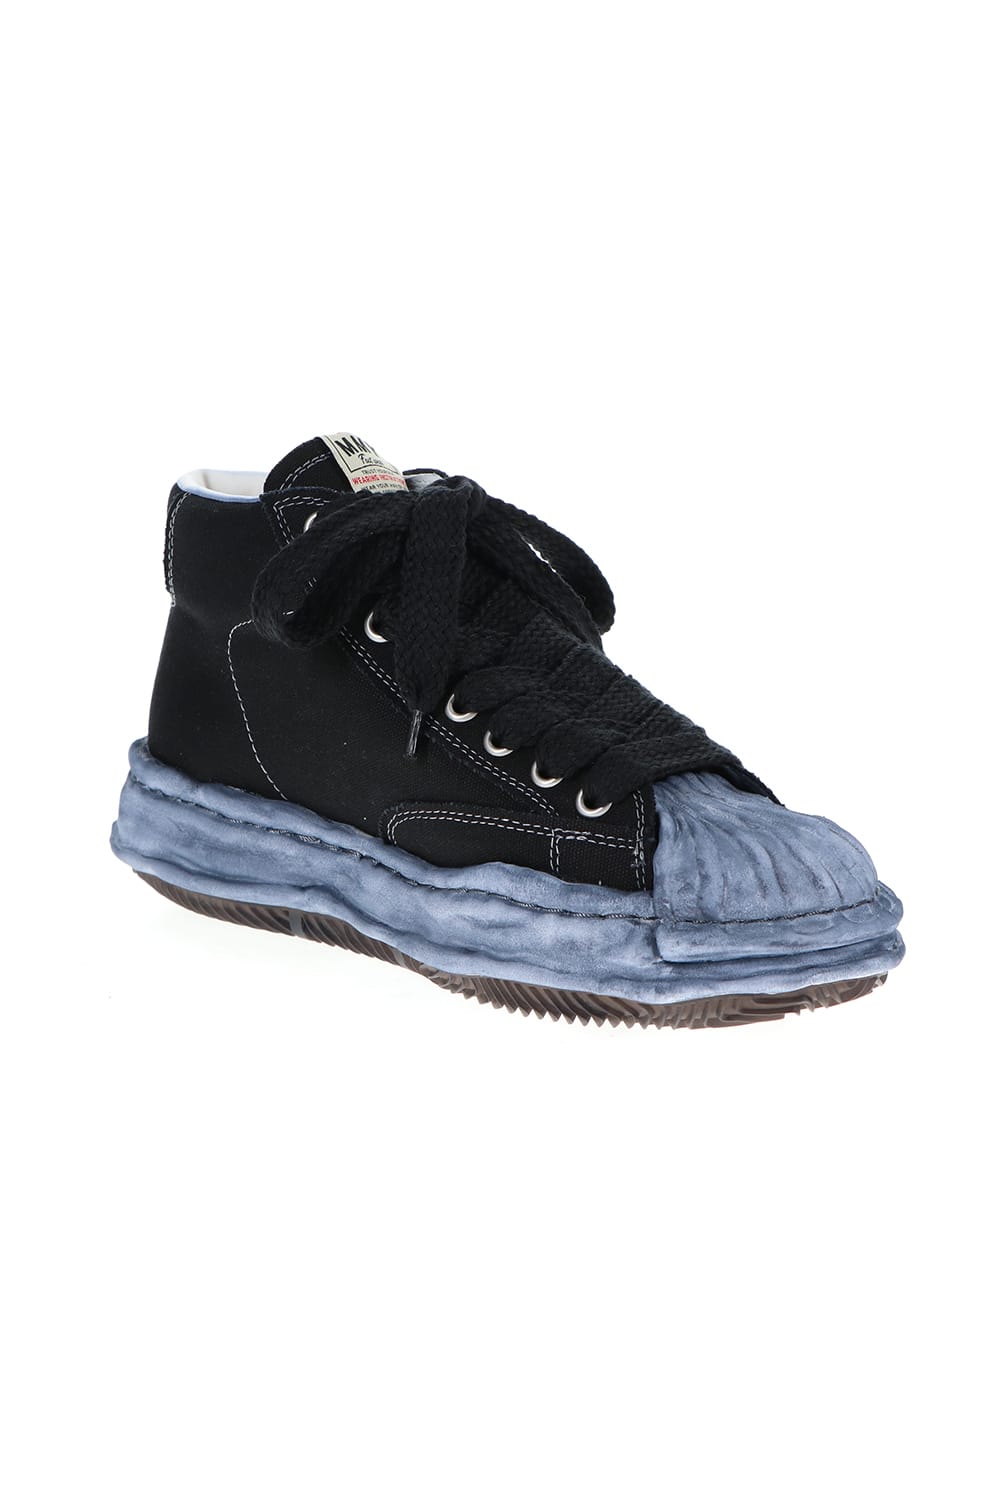 -BLAKEY High- Original STC sole over dyed canvas High-Top sneakers Black